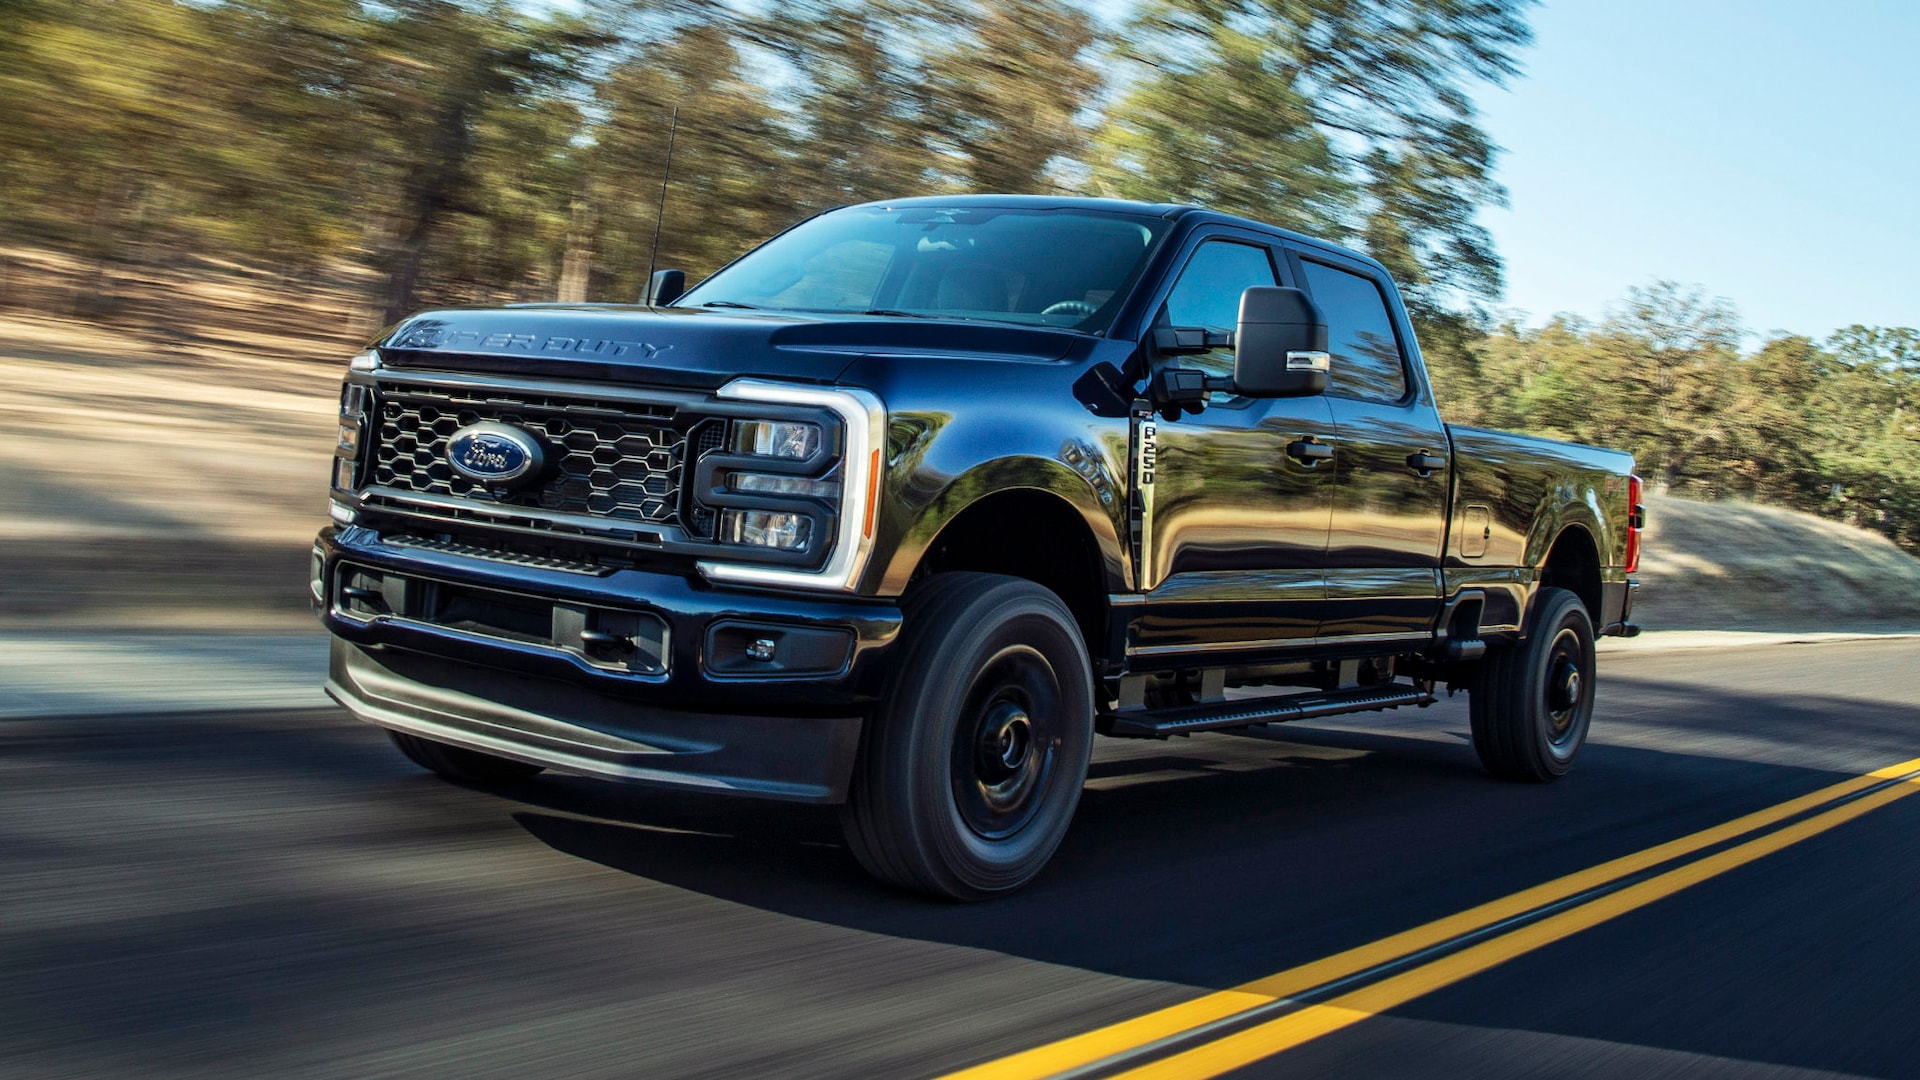 2023 Ford F-250 Prices, Reviews, and Photos - MotorTrend